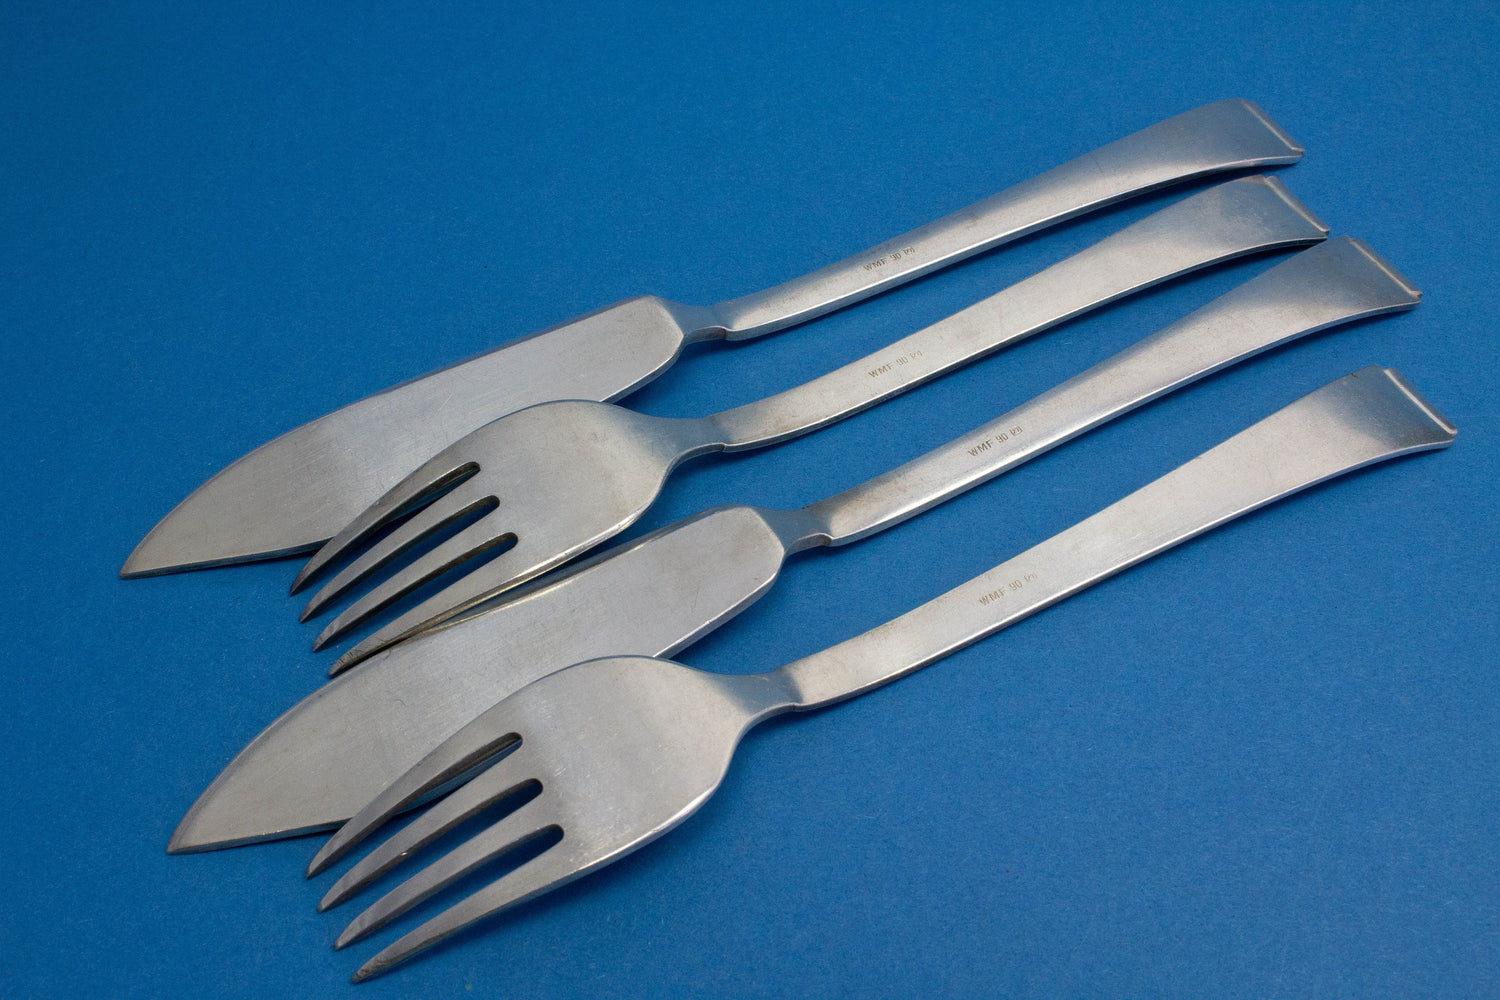 Fish cutlery for 2 people, candle light dinner, WMF 2500